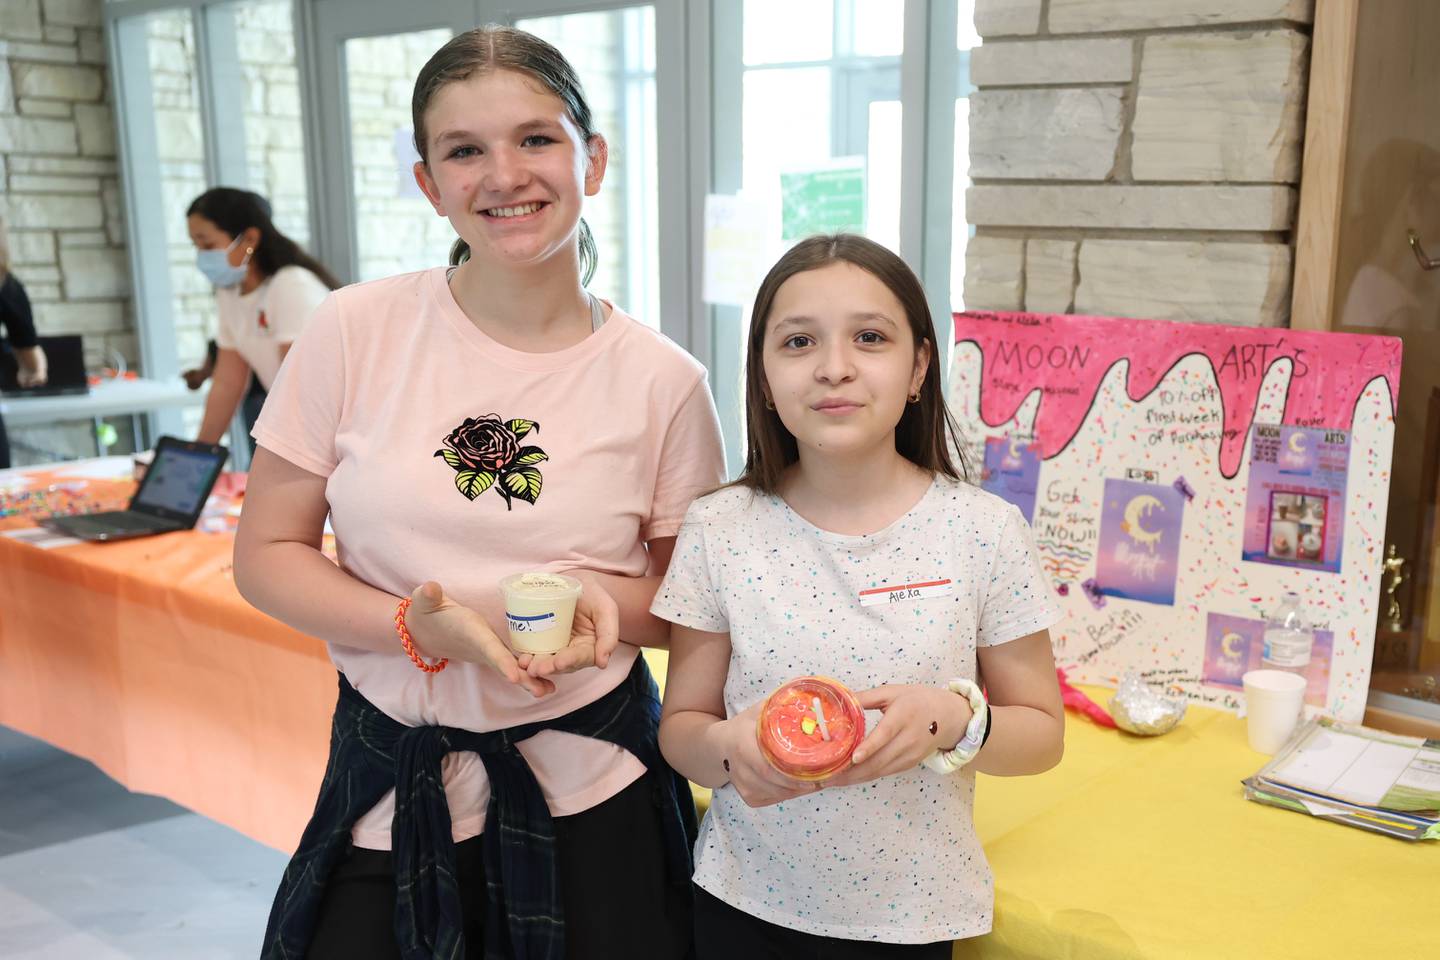 Melanie Bell, left, and Alexa Rodriguez hold their slim product at their slim business Moon Arts at the Laraway 70C 5th Grade Business Expo. Friday, May 13, 2022, in Joliet.